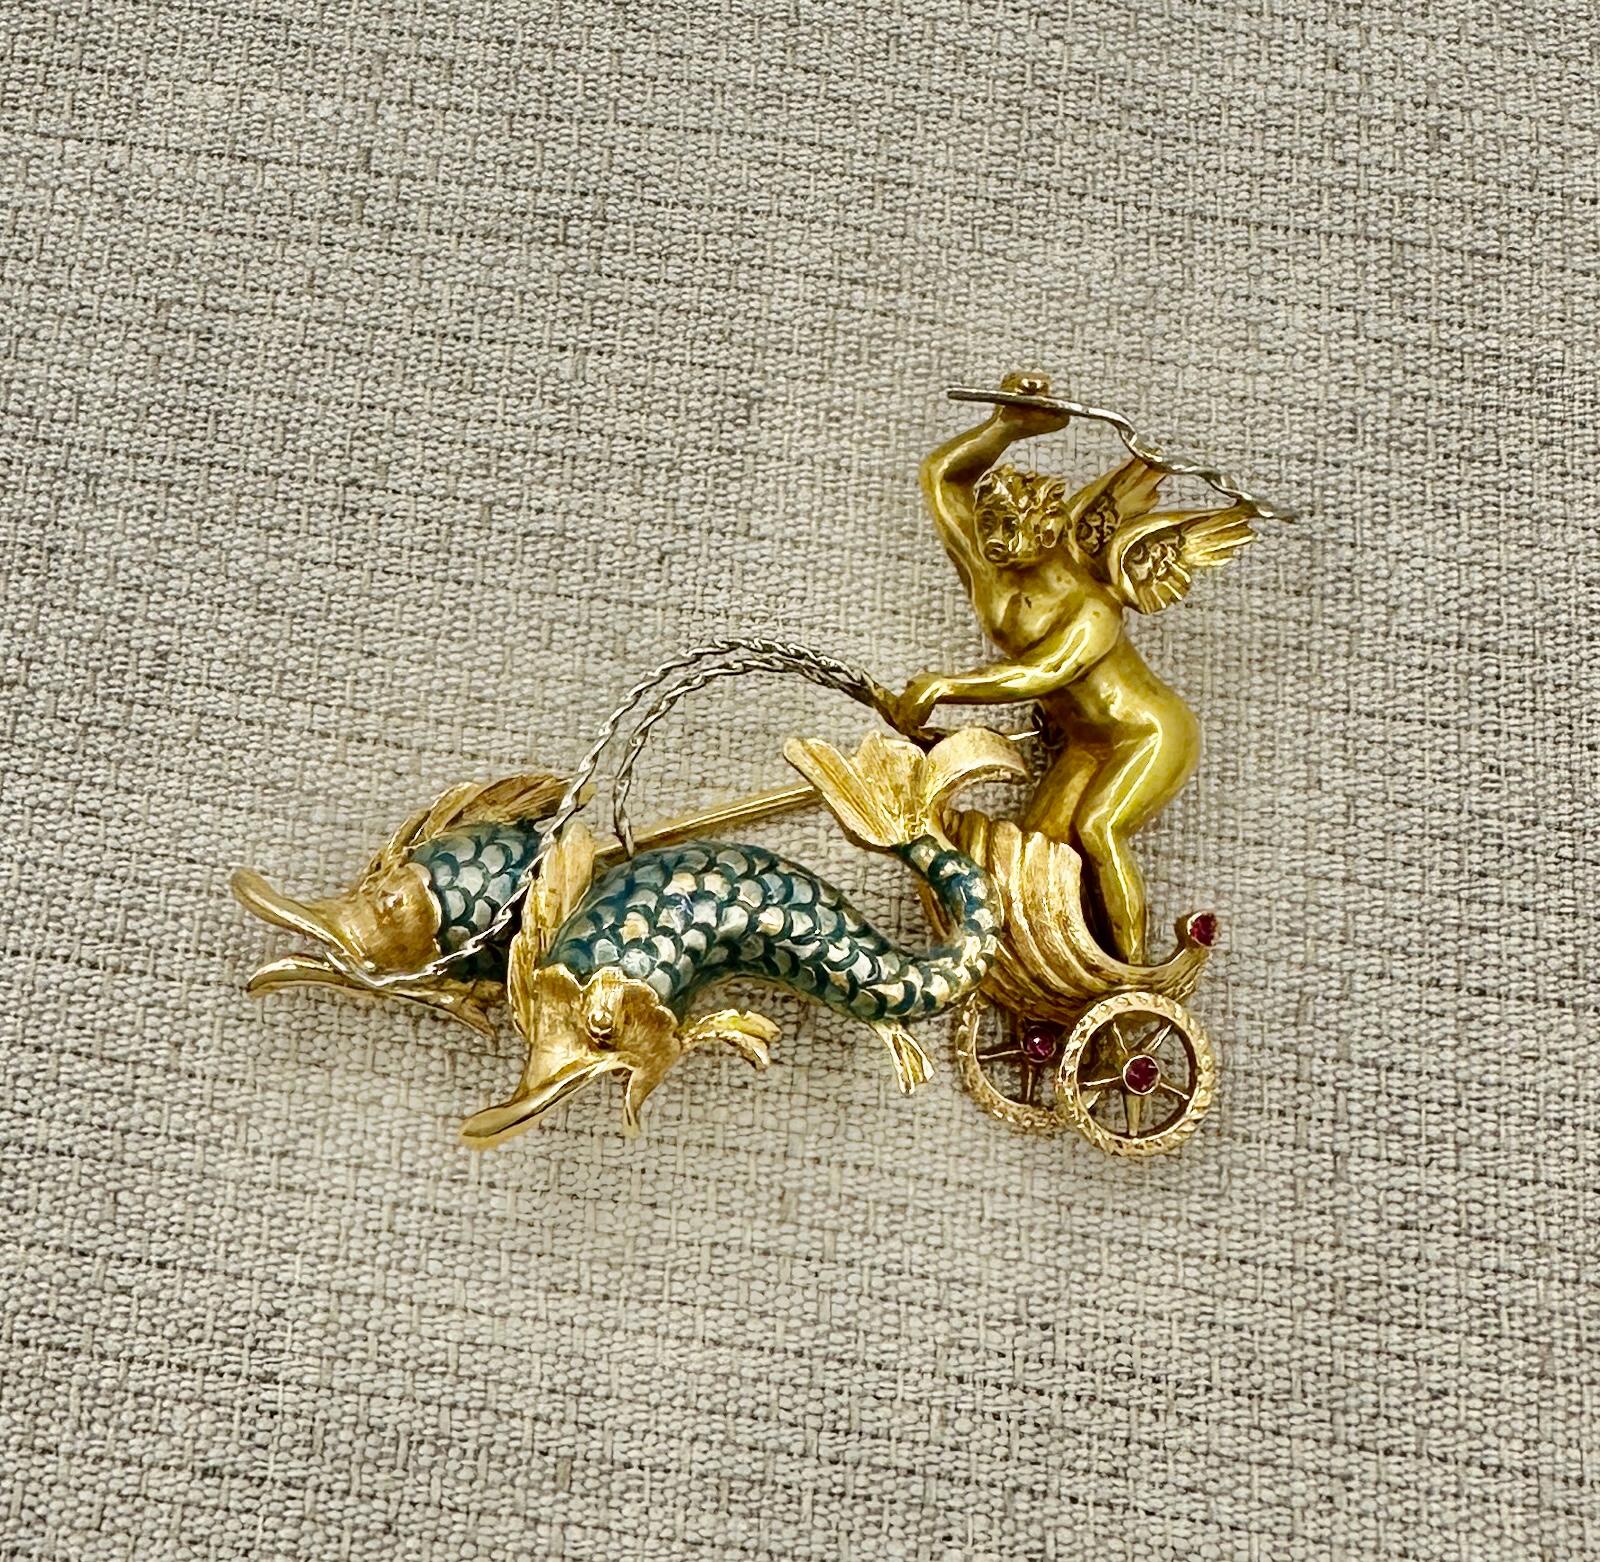 This is very rare and wonderful Antique Enamel Brooch Pin in 18 Karat Gold with a Winged Cherub or Angel Riding in a Dolphin pulled Chariot with gorgeous green-blue Enamel and three round Rubies.   The brooch has exquisite three dimensional design